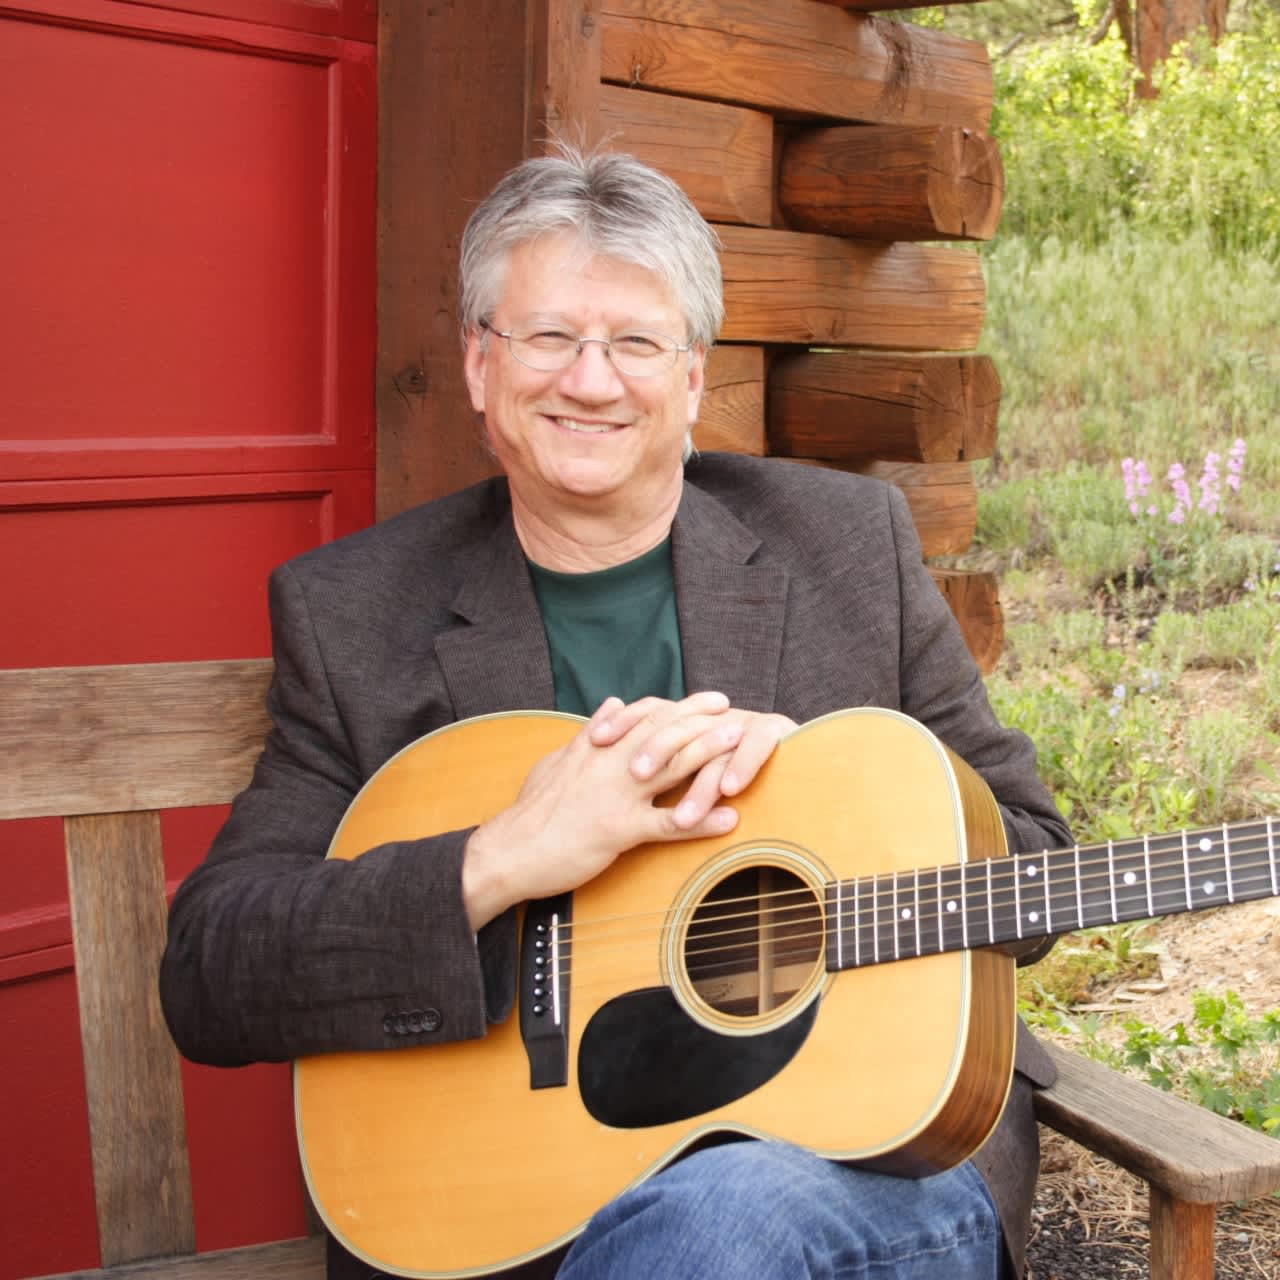 Rock and Roll Hall of Fame member Richie Furay will perform at the Ossining Public Library.